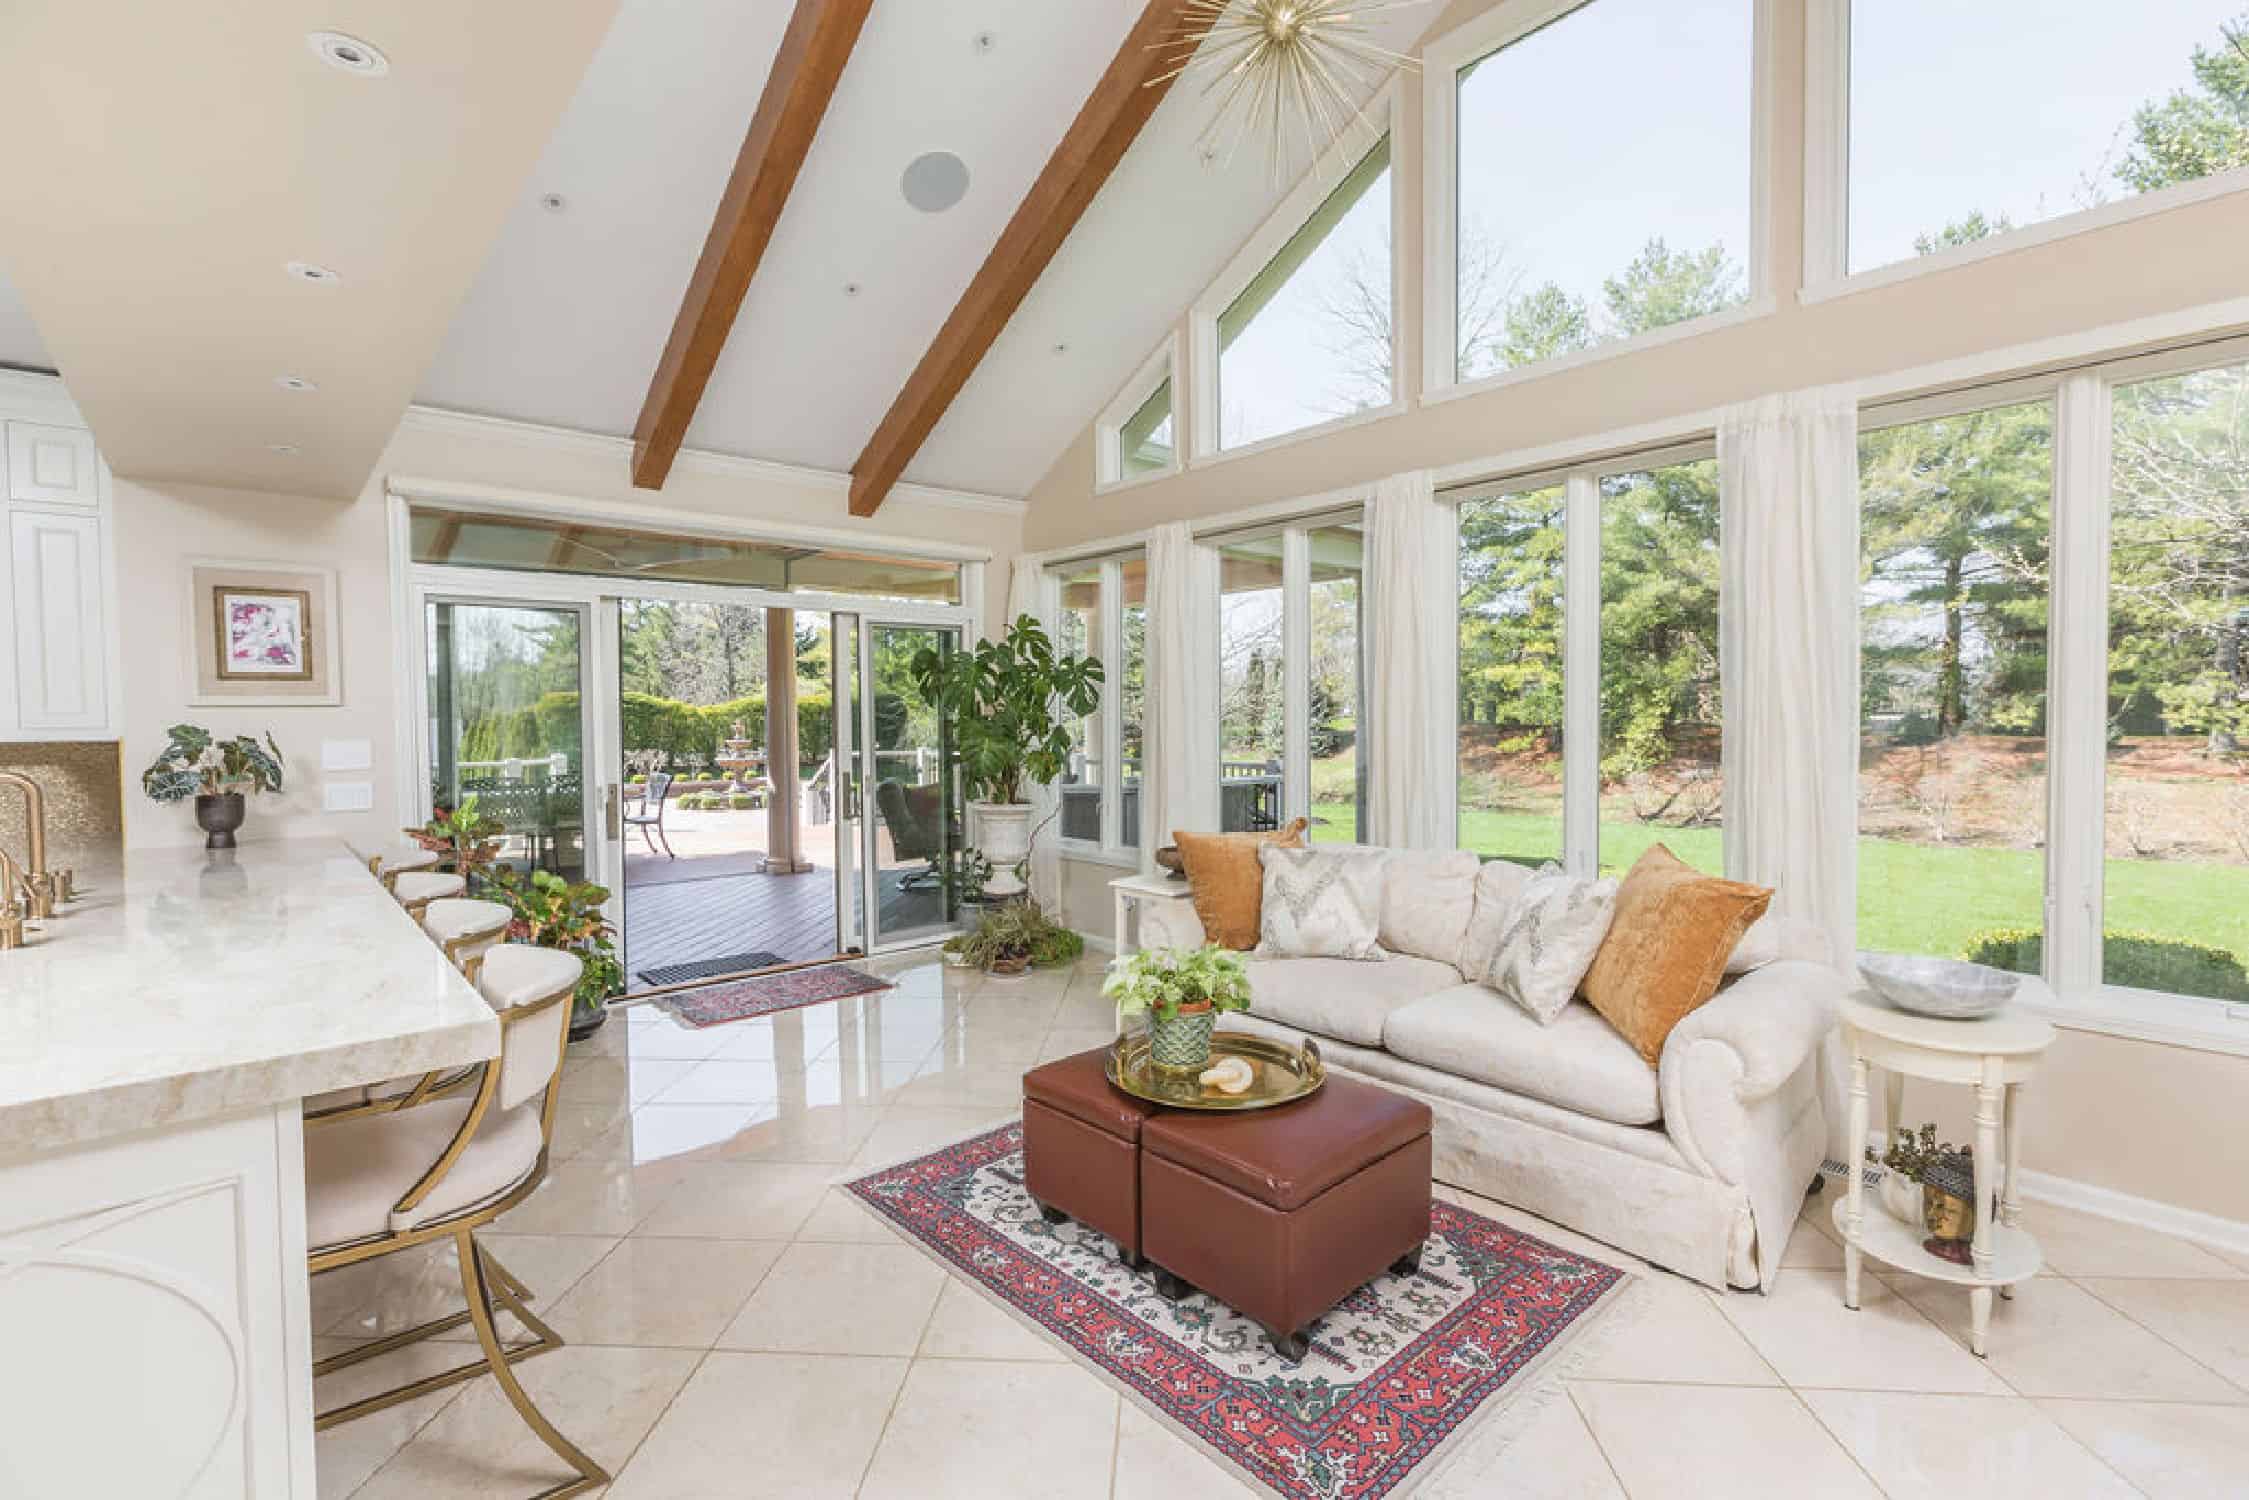 Nicholas Design Build | Remodel of a large sun room with a fireplace and large windows.